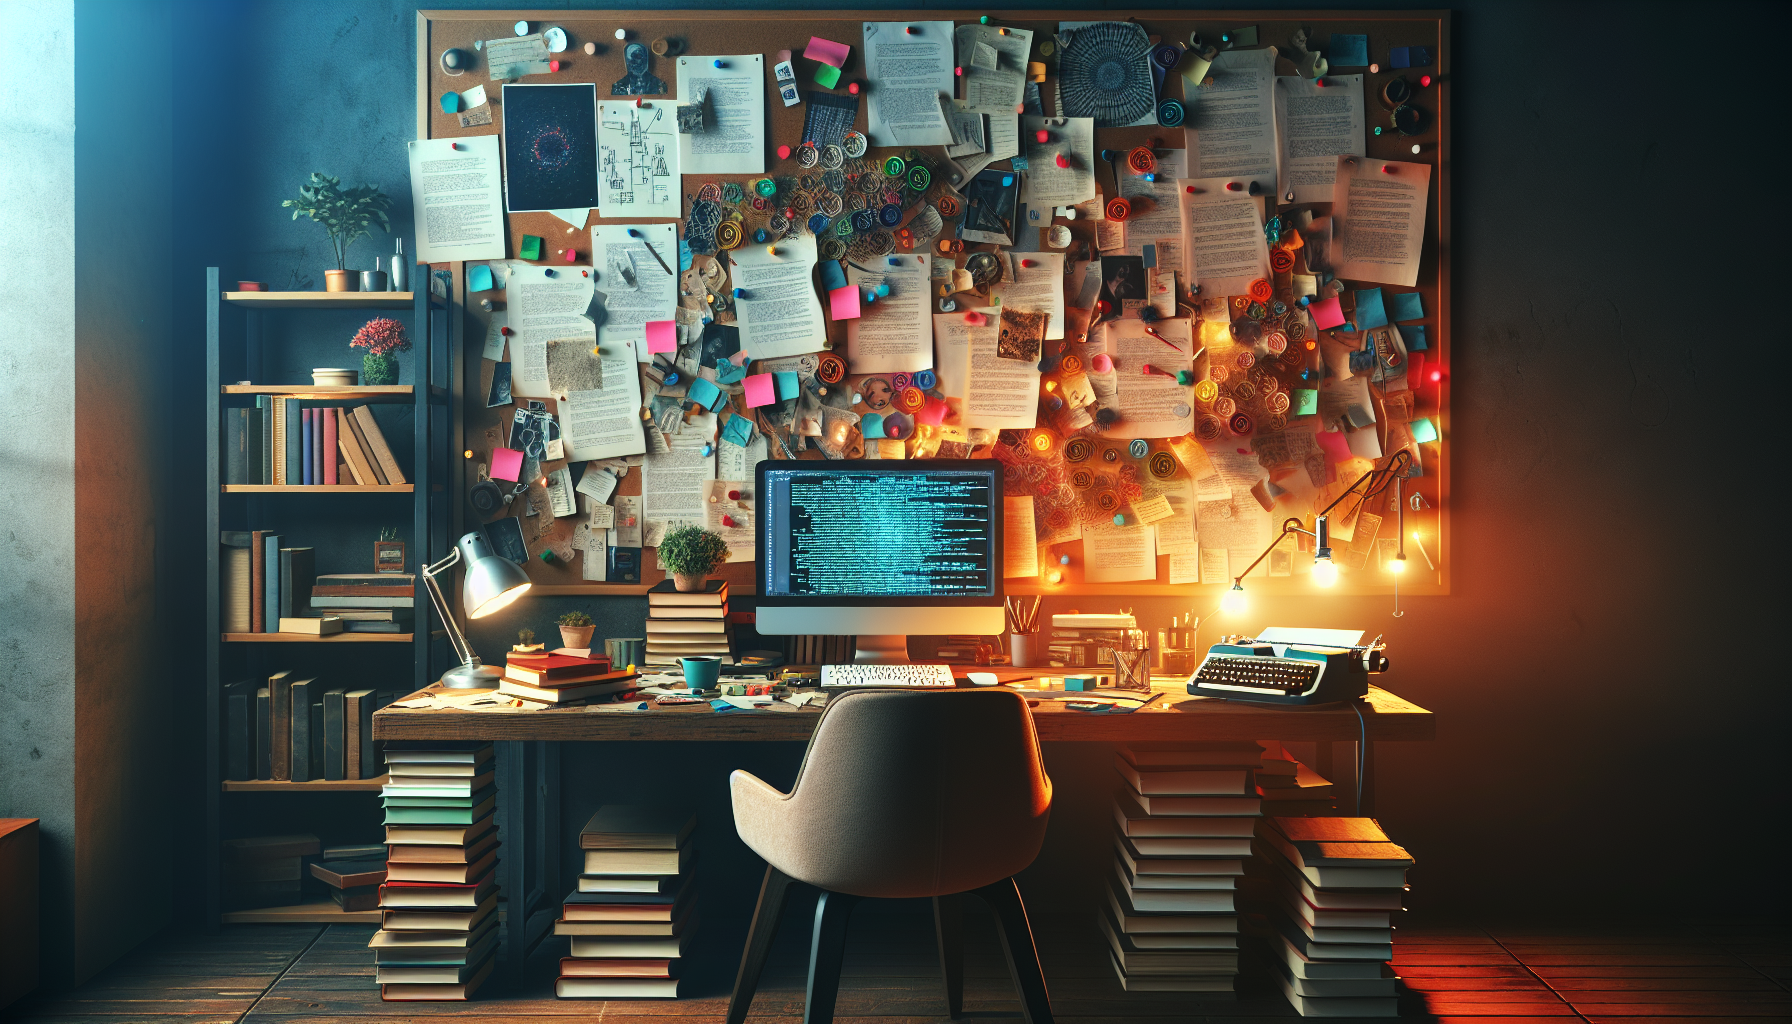 An artistic workspace with a cluttered desk, scattered scripts, and a vintage typewriter surrounded by stacks of books about screenwriting. In the background, a corkboard filled with colorful notes an